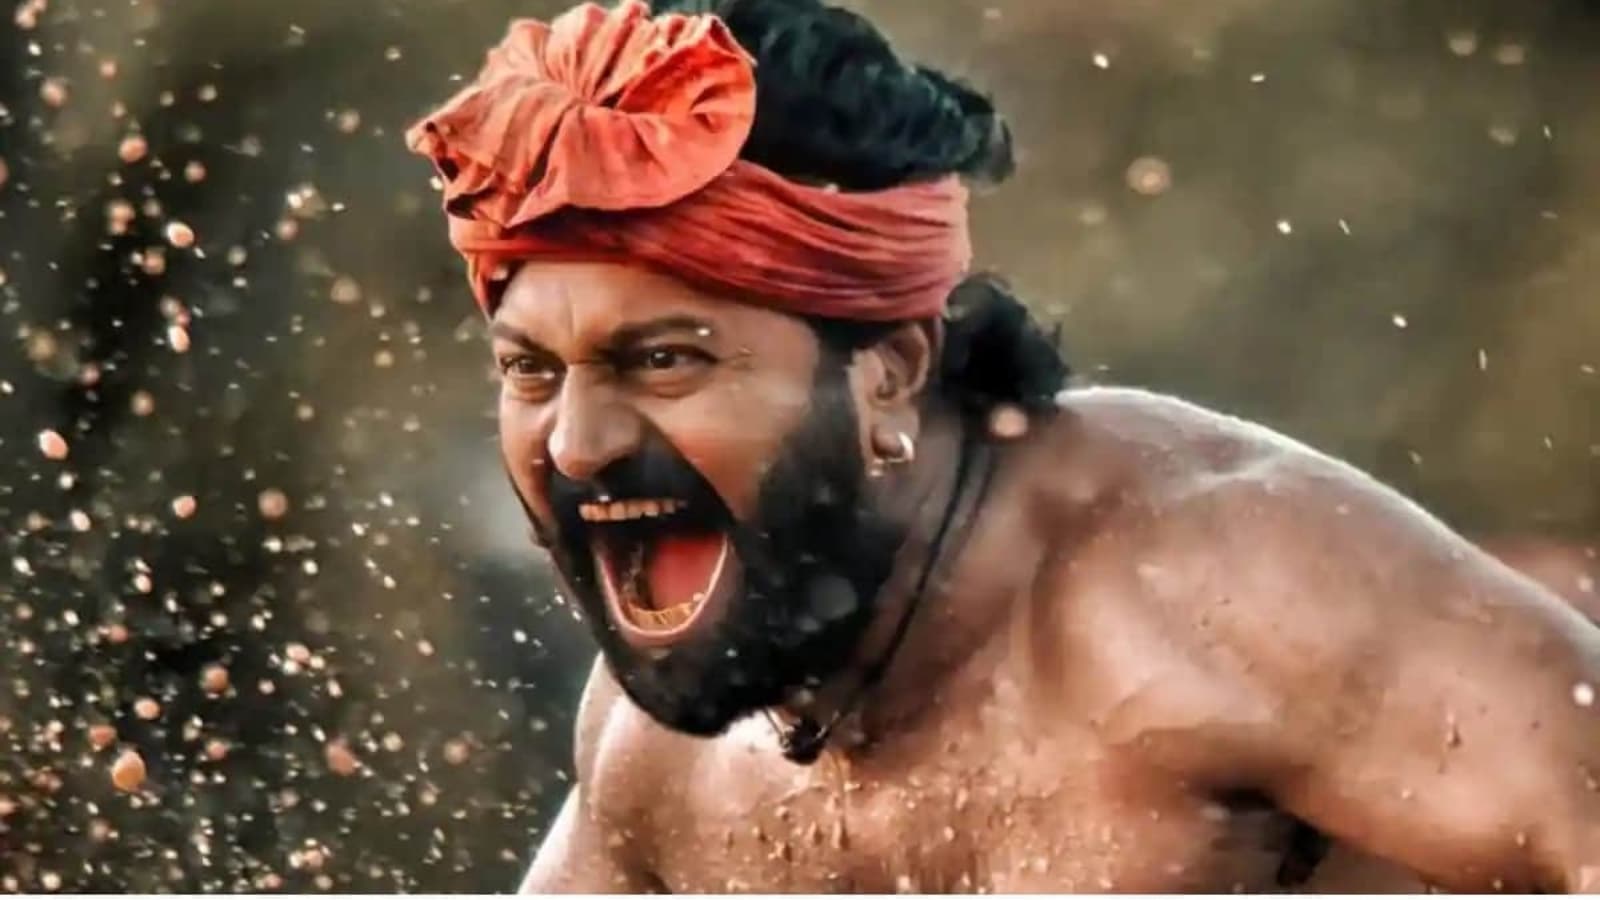 kantara-soars-past-inr200-crore-worldwide-beats-kgf-chapter-2-to-become-most-watched-film-ever-in-karnataka